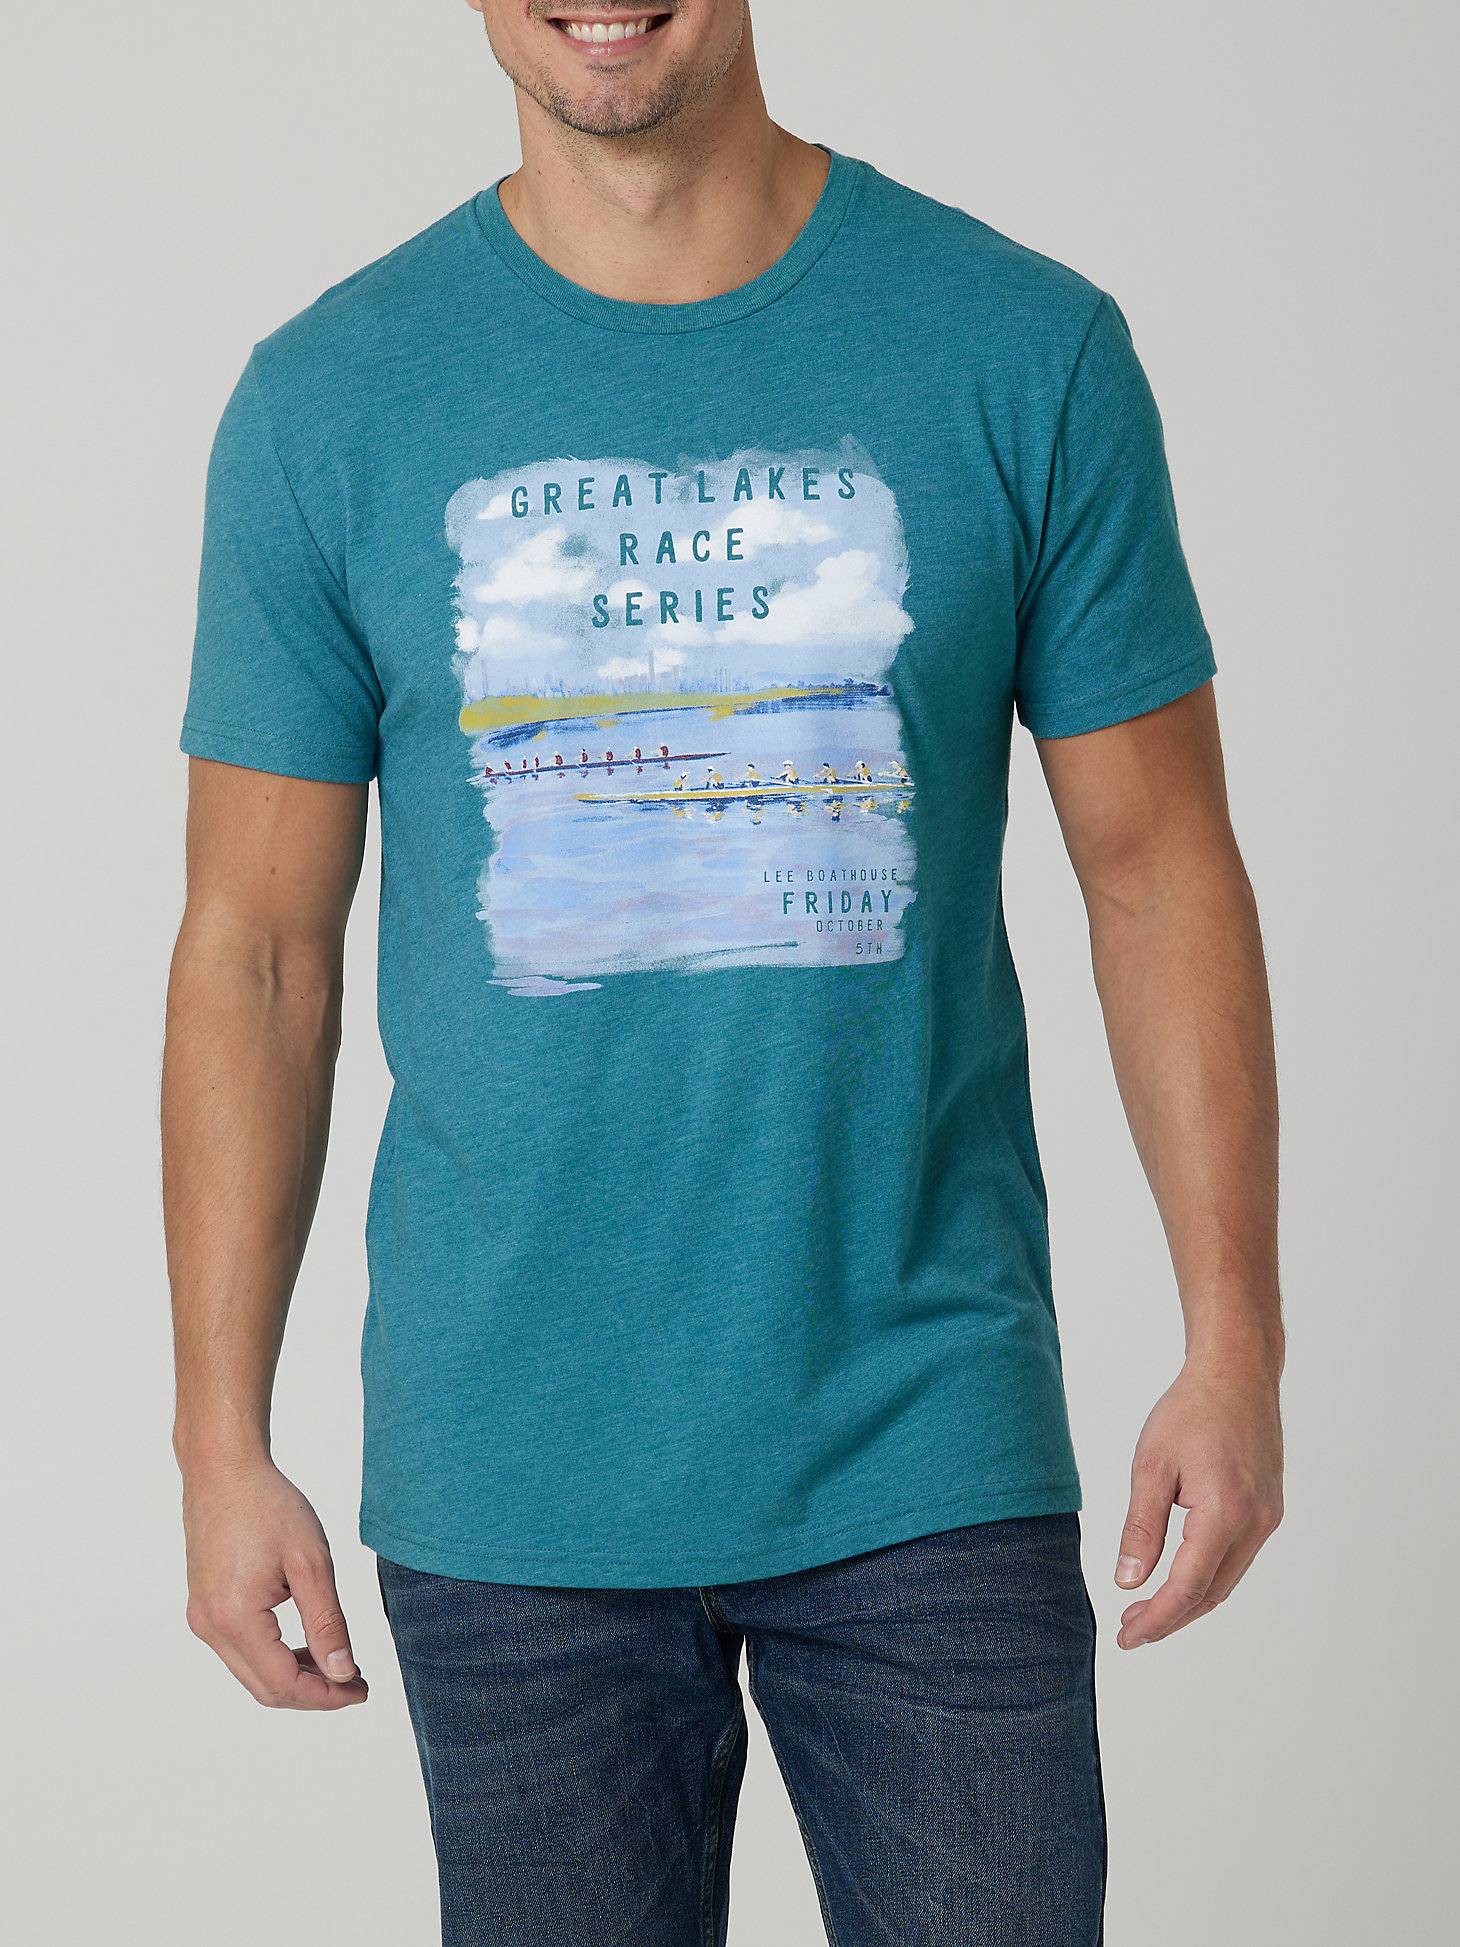 Men's Great Lakes Race Graphic Tee in Teal Heather main view